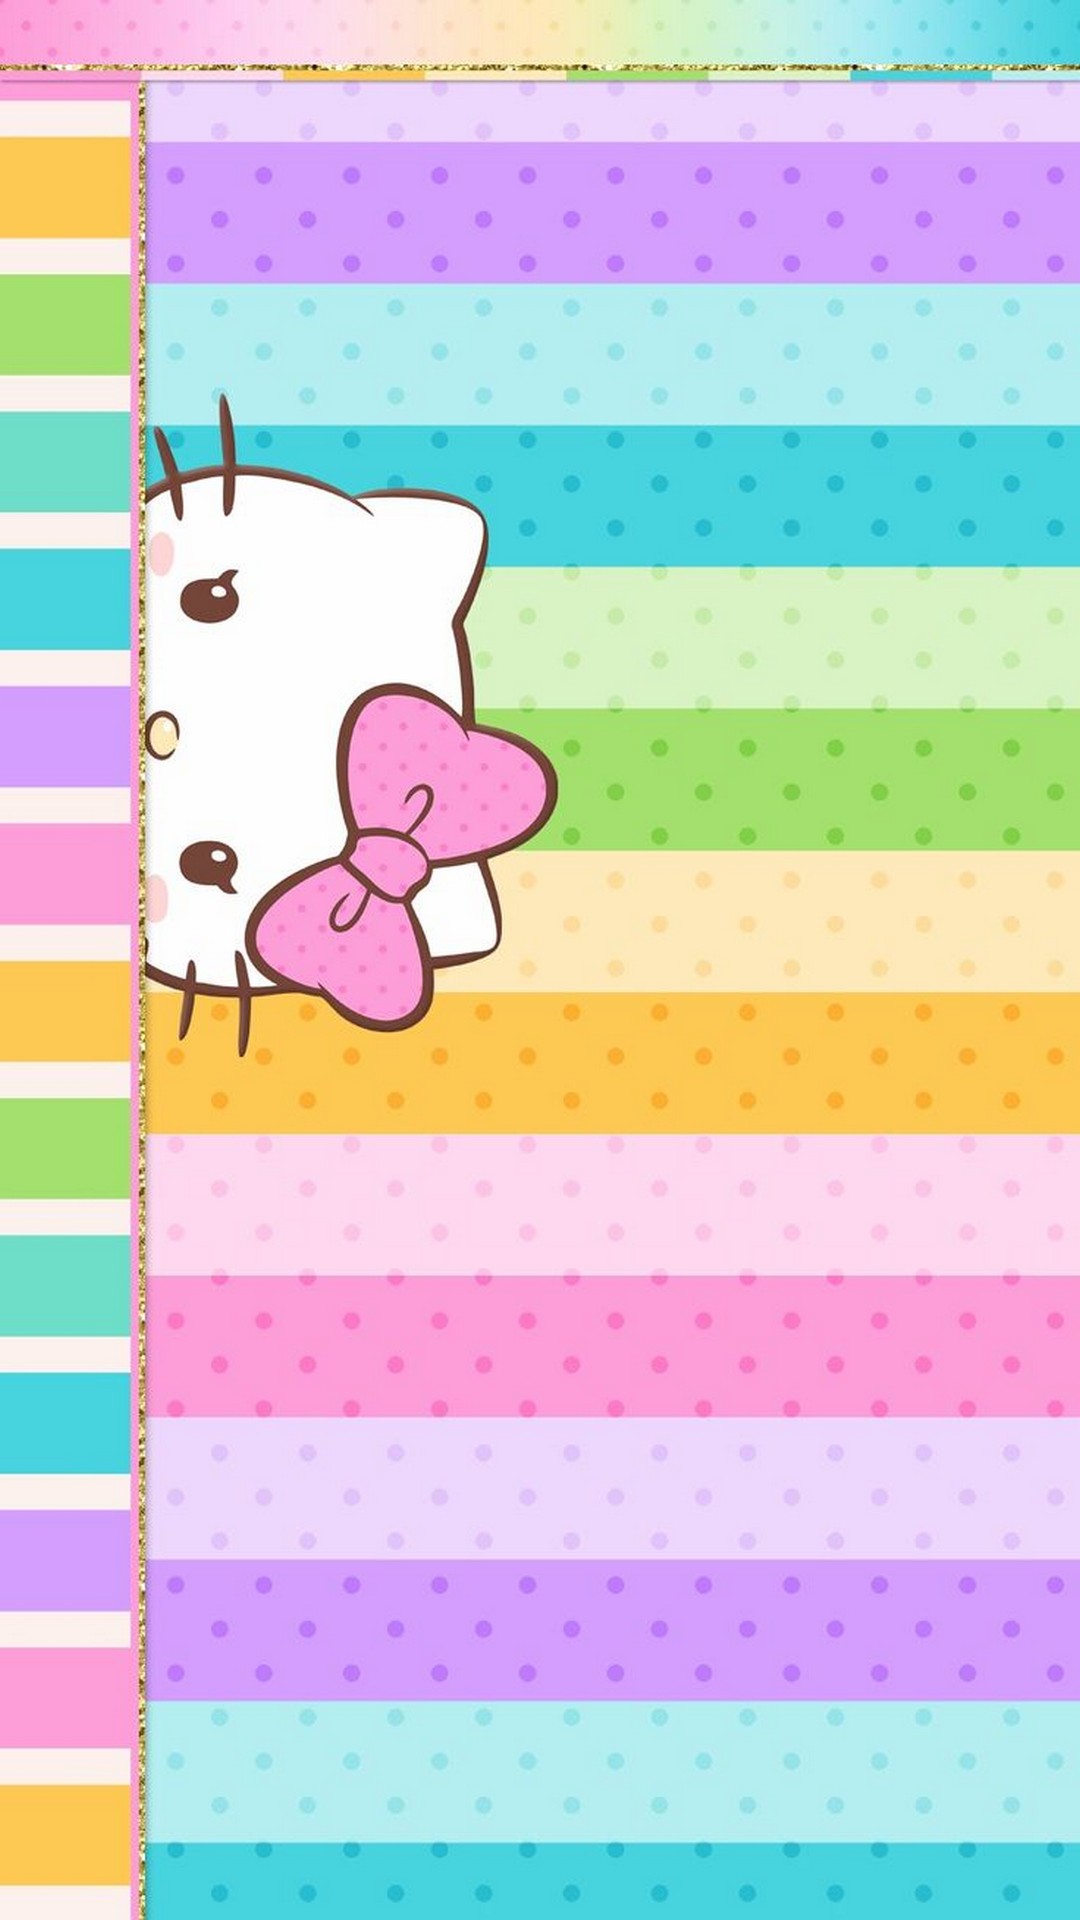 Hello Kitty Characters Android Wallpaper with resolution 1080X1920 pixel. You can make this wallpaper for your Android backgrounds, Tablet, Smartphones Screensavers and Mobile Phone Lock Screen